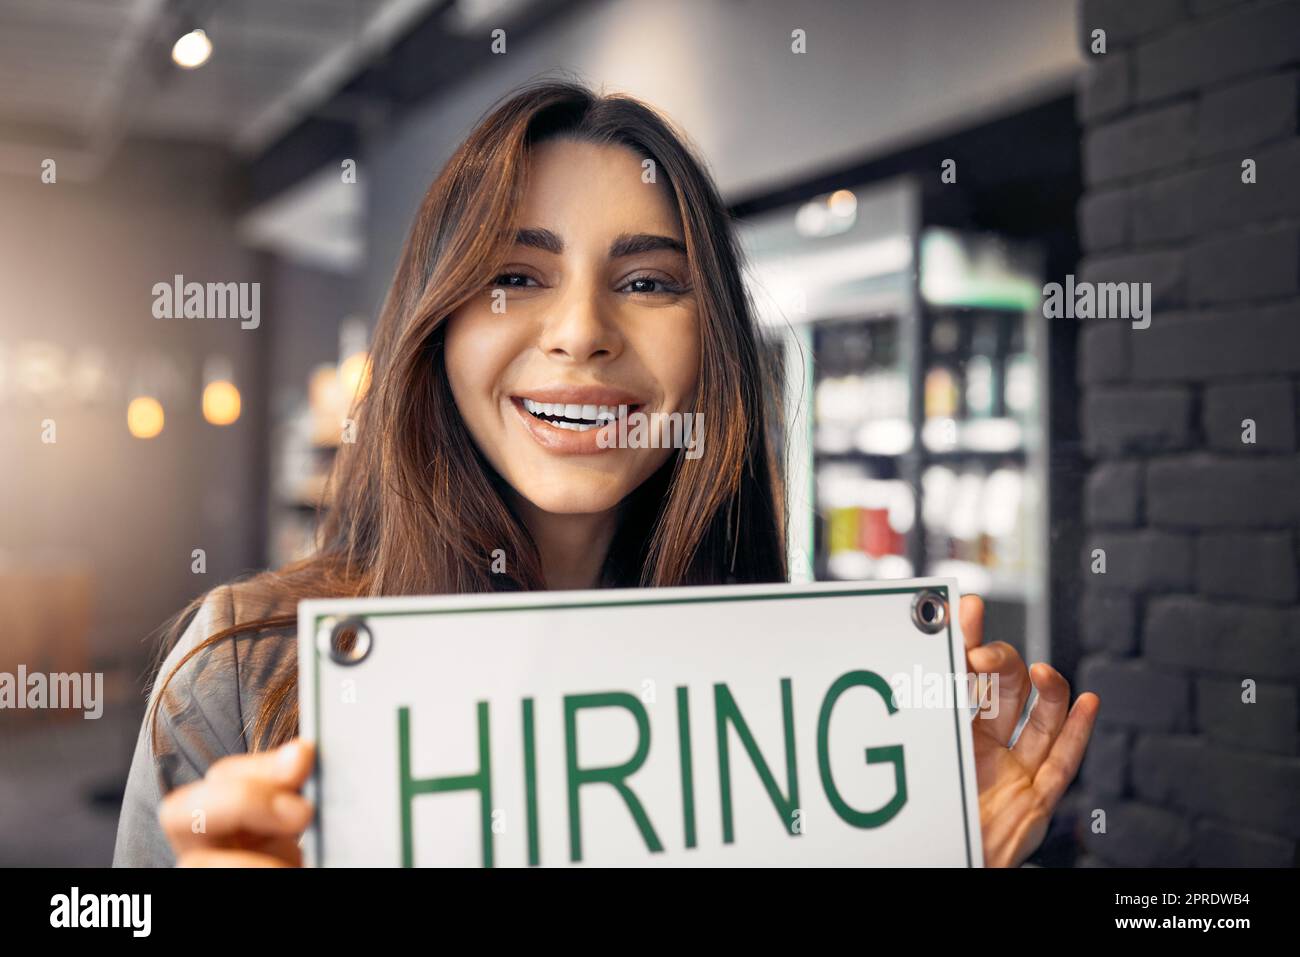 Looking for a job. Cropped portrait of an attractive young woman holding up a hiring sign while standing in her coffee shop. Stock Photo